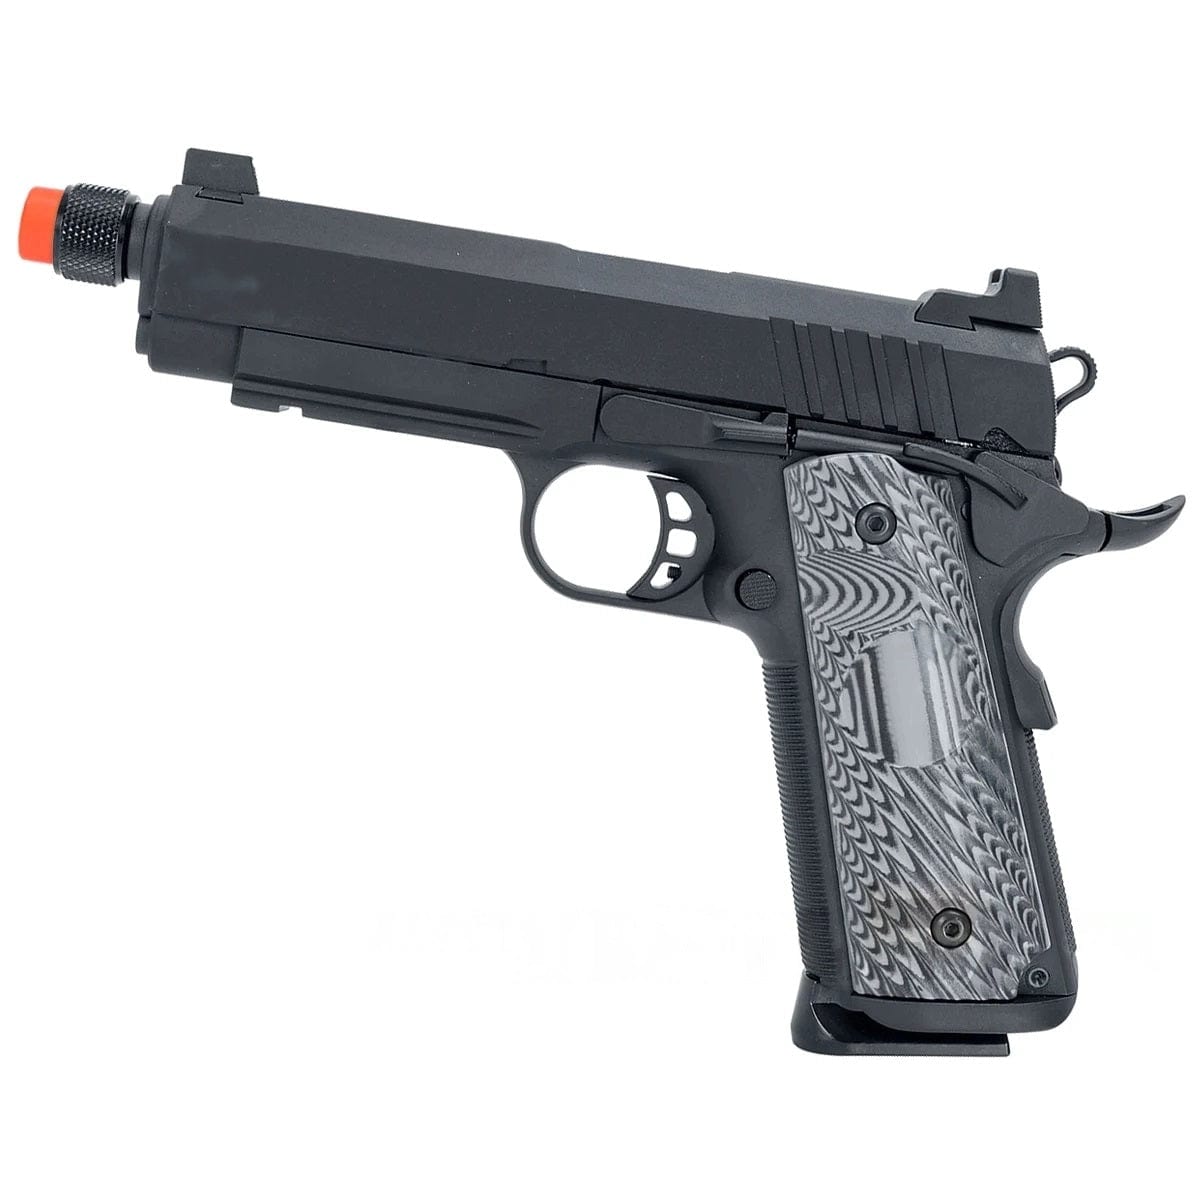 Airsportinggoods SRC SR1911 SILENT HAWK CO2 BLOWBACK AIRSOFT PISTOL WITH CASE